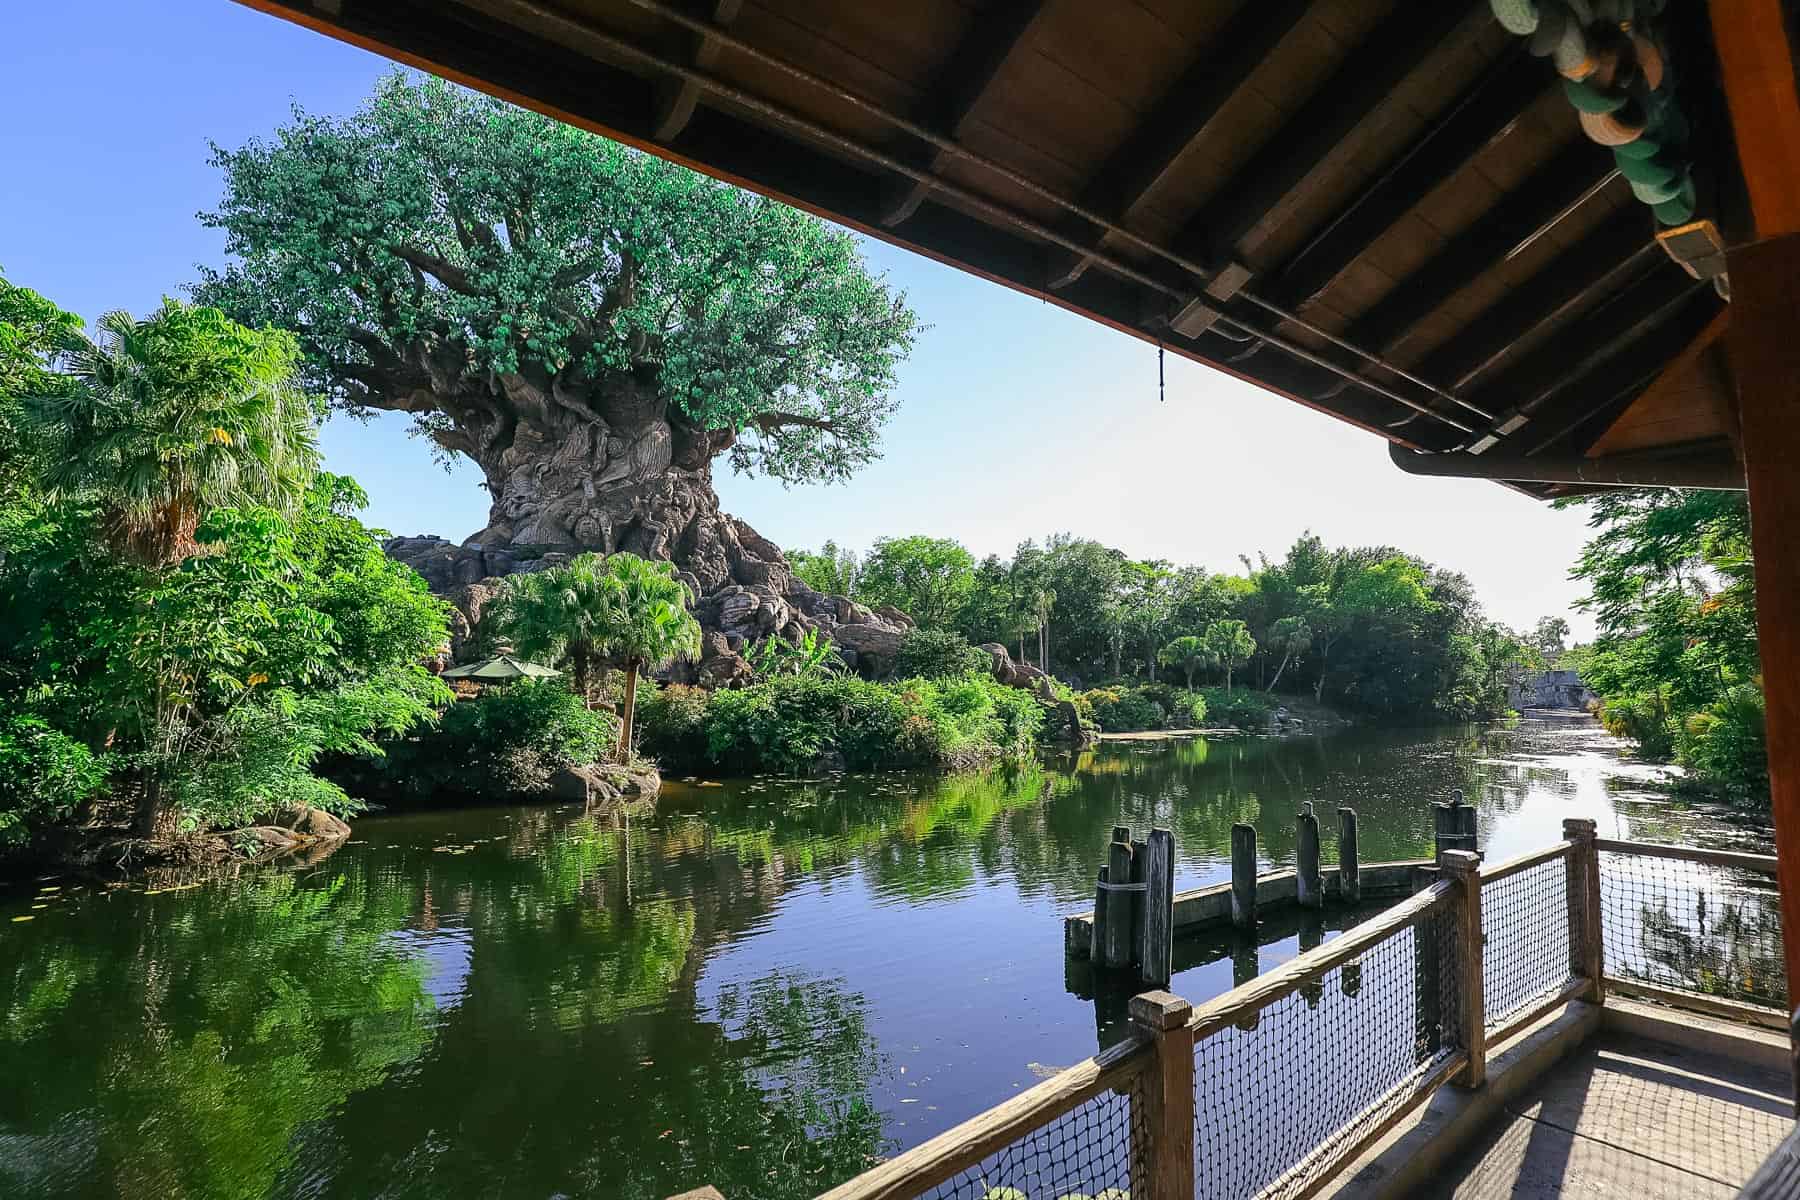 a view of the Tree of Life from one of the dining areas along the water at Animal Kingdom near Yak and Yeti 